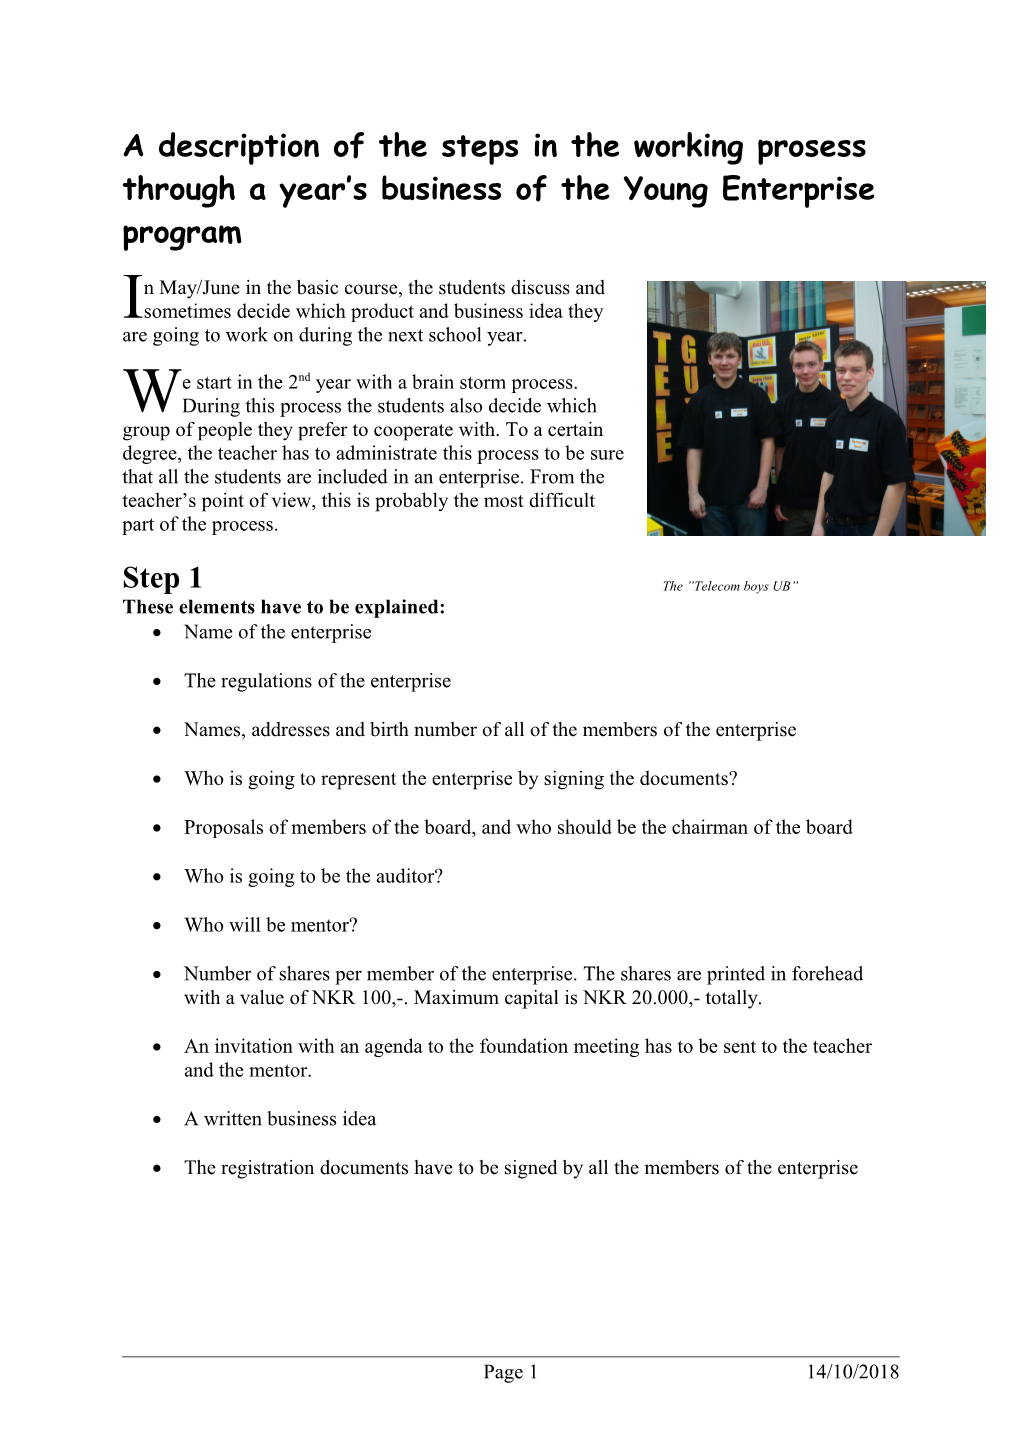 Steps in the Working Prosess Through a Years Business of the Student Business Enterprise